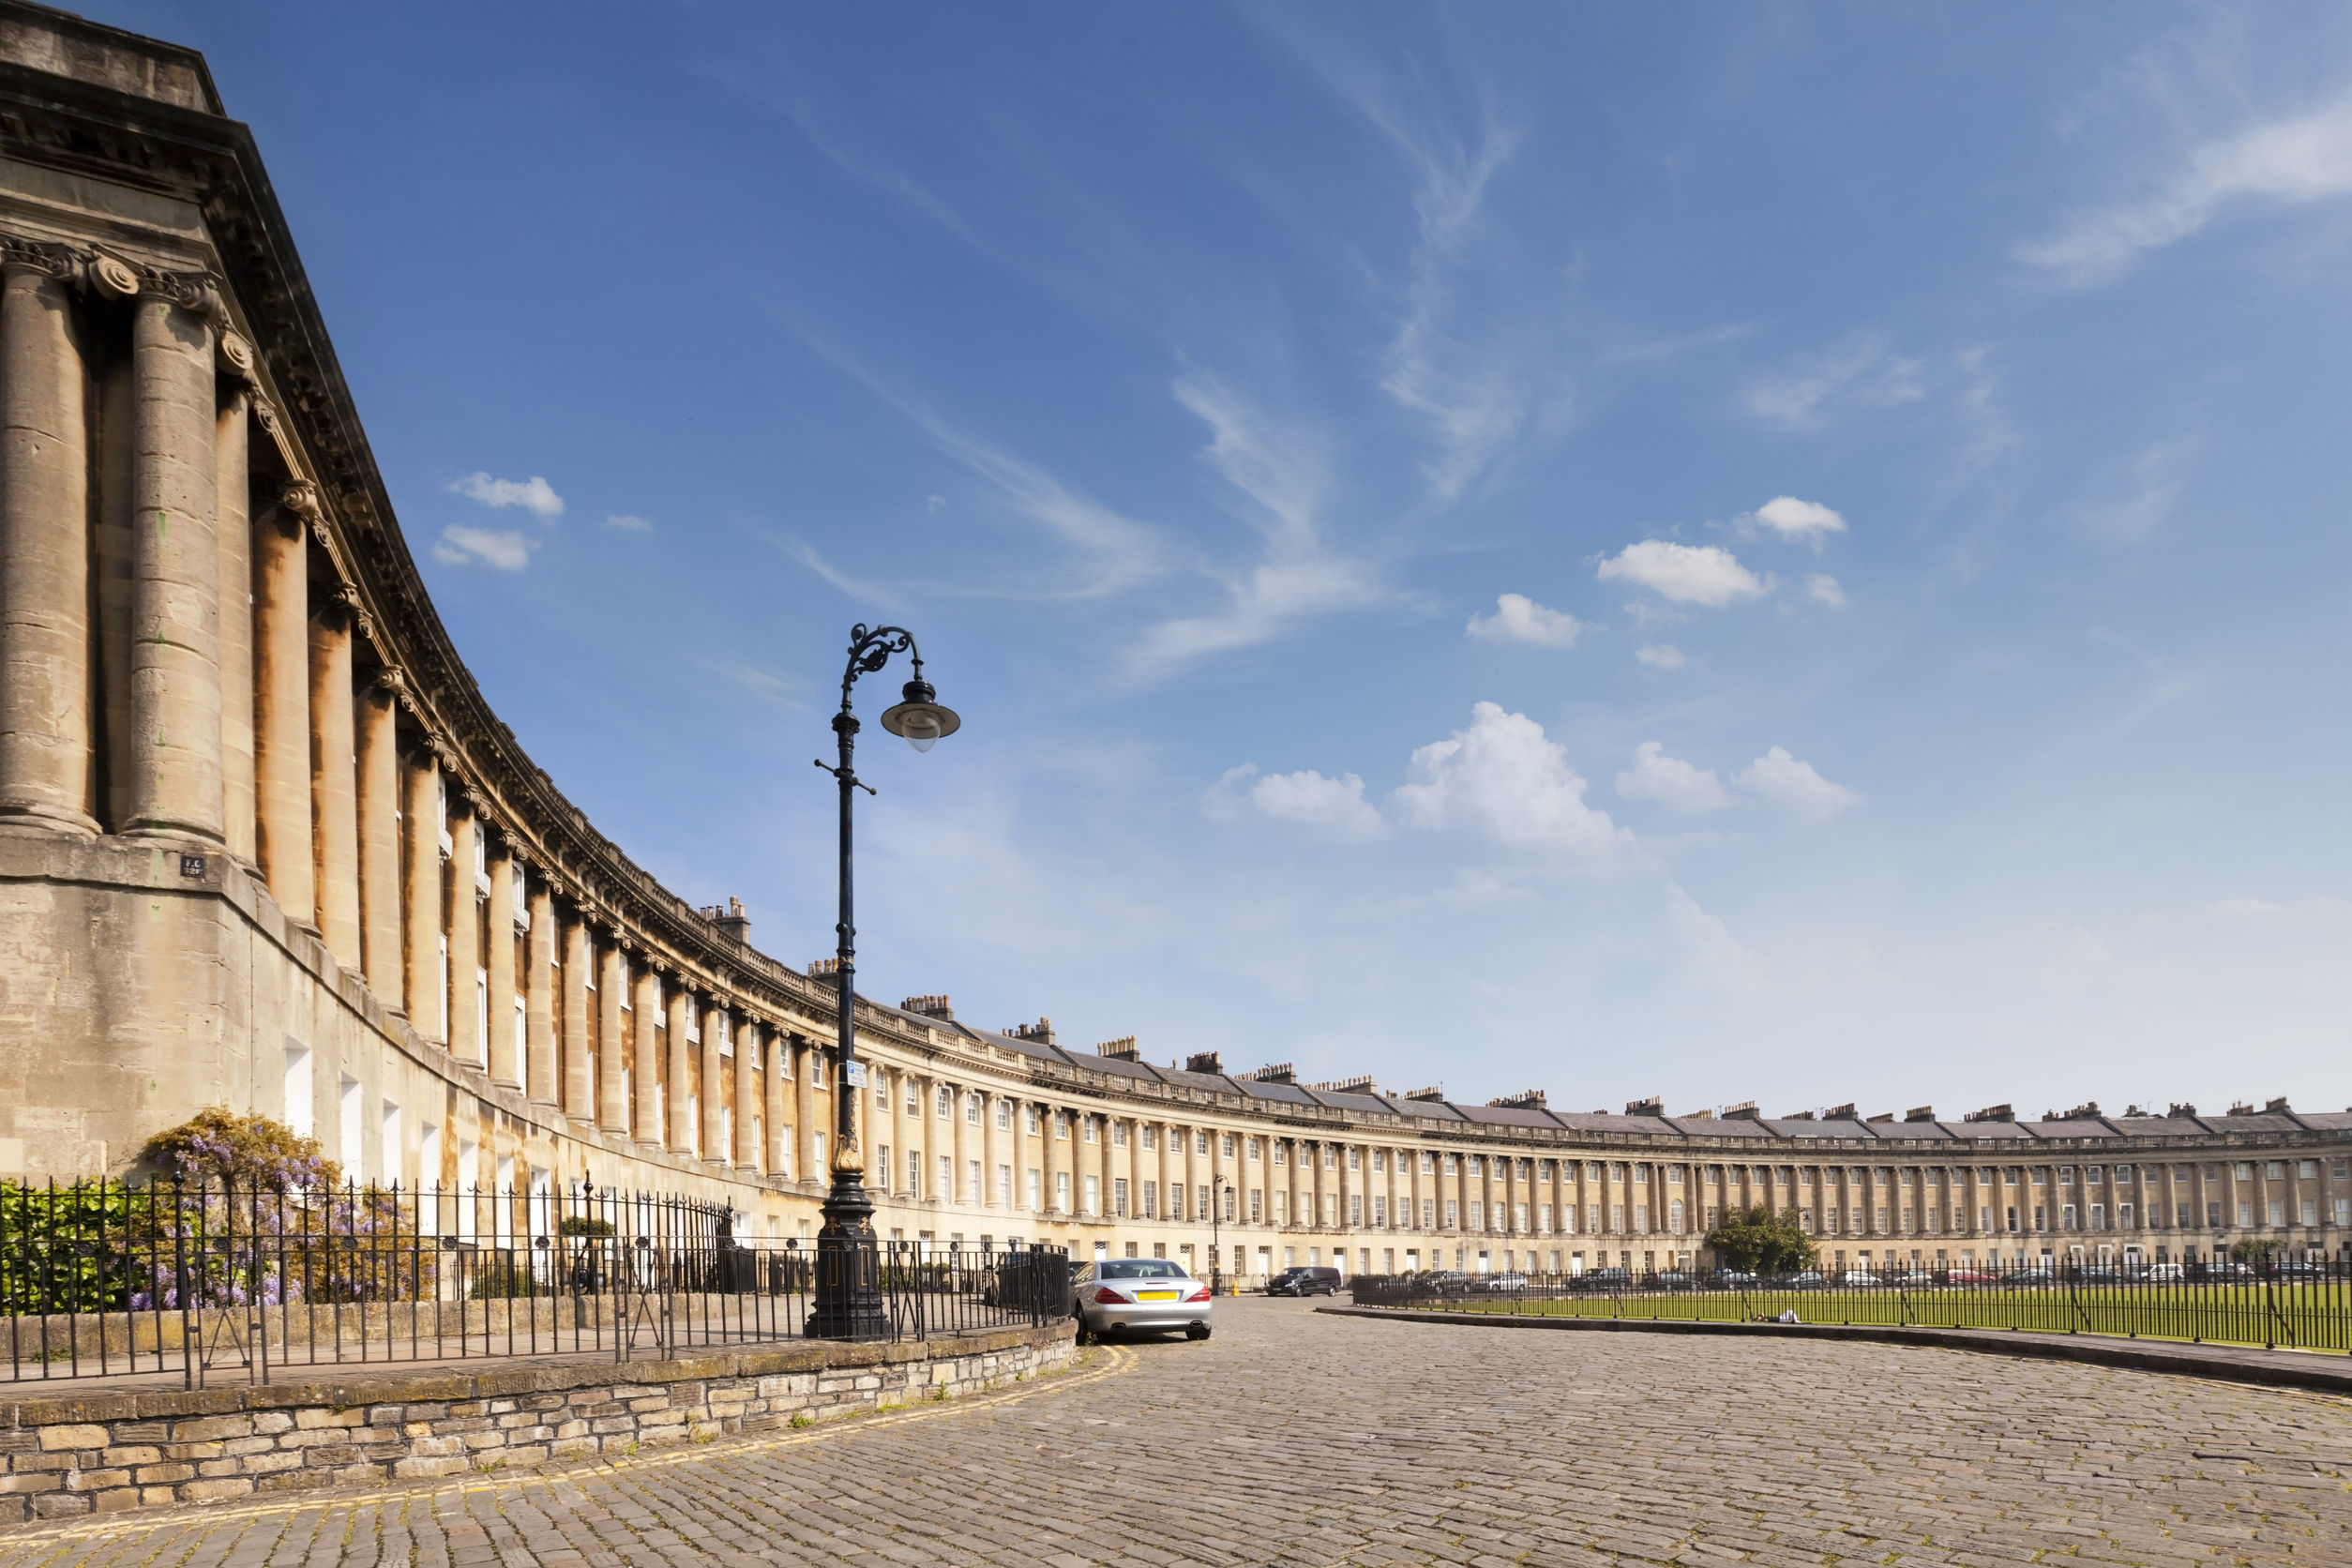 Royal Crescent in Bath is one of the city's great landmarks and is a huge tourist attraction It was designed by John Wood and built between 1767 and 1774.